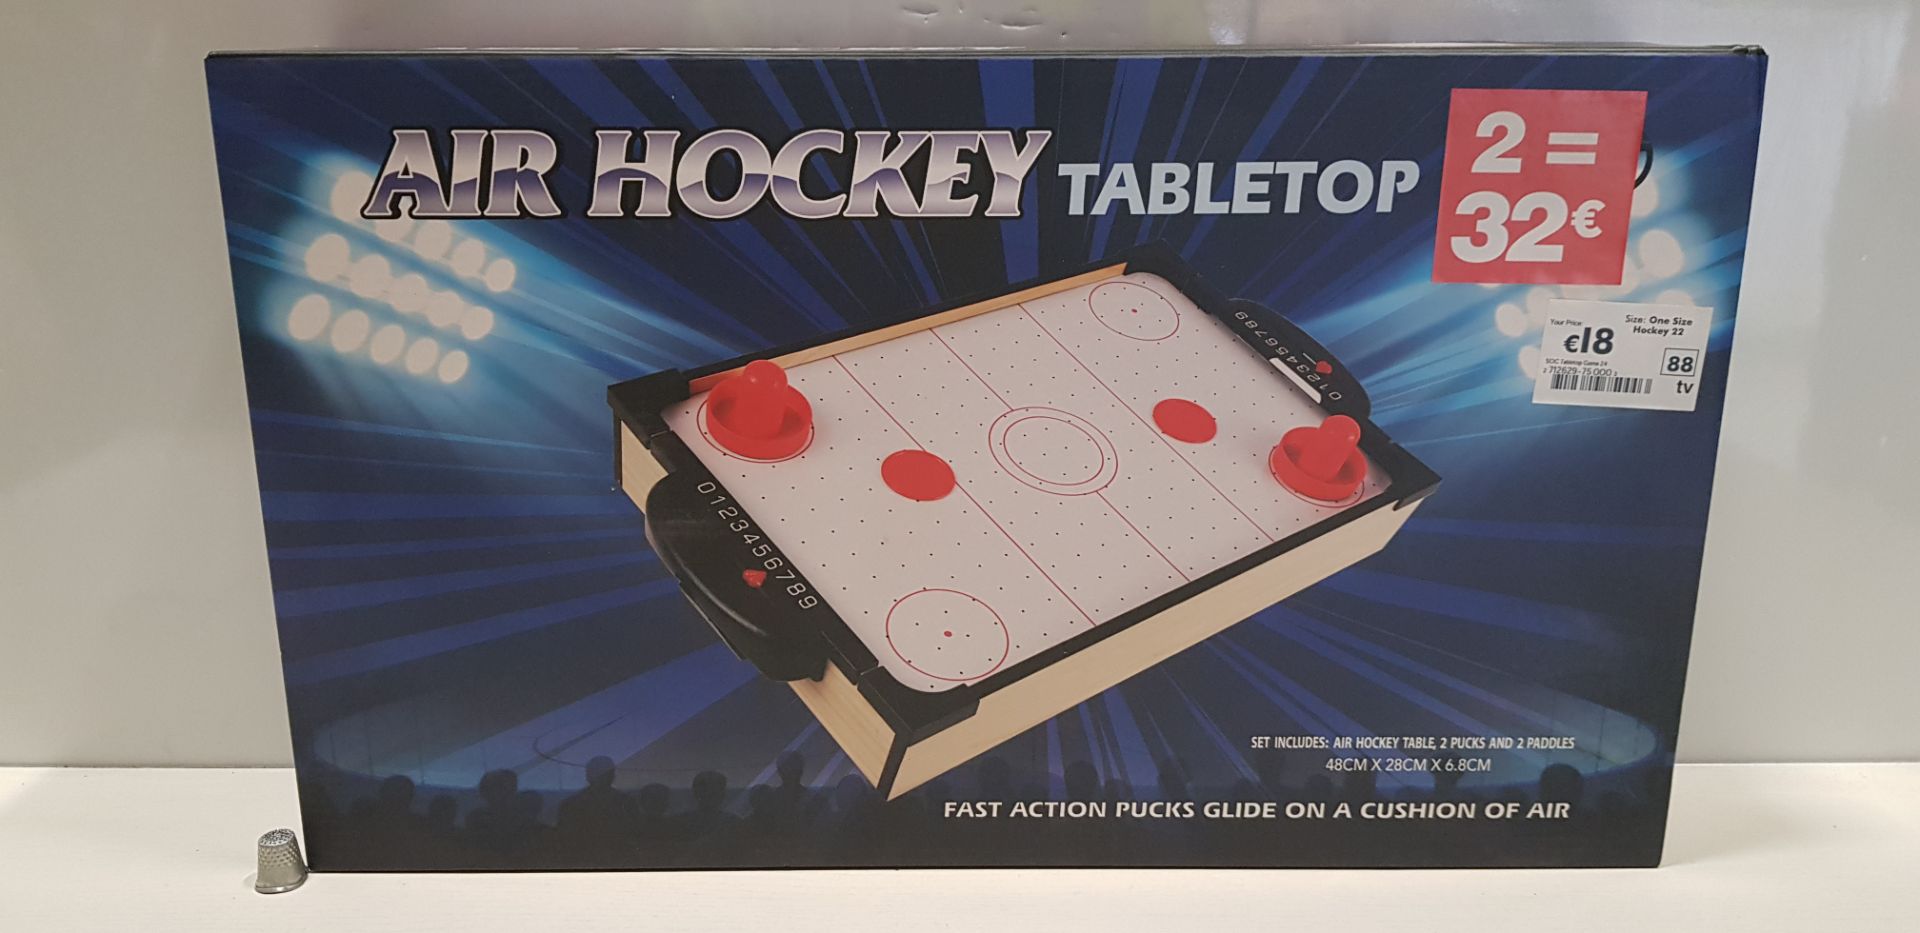 24 X BRAND NEW BOXED AIR HOCKEY TABLE TOP INCLUDES 2X PUCKS AND 2X PADDLES - 48CM X 28CM X 6.8CM -